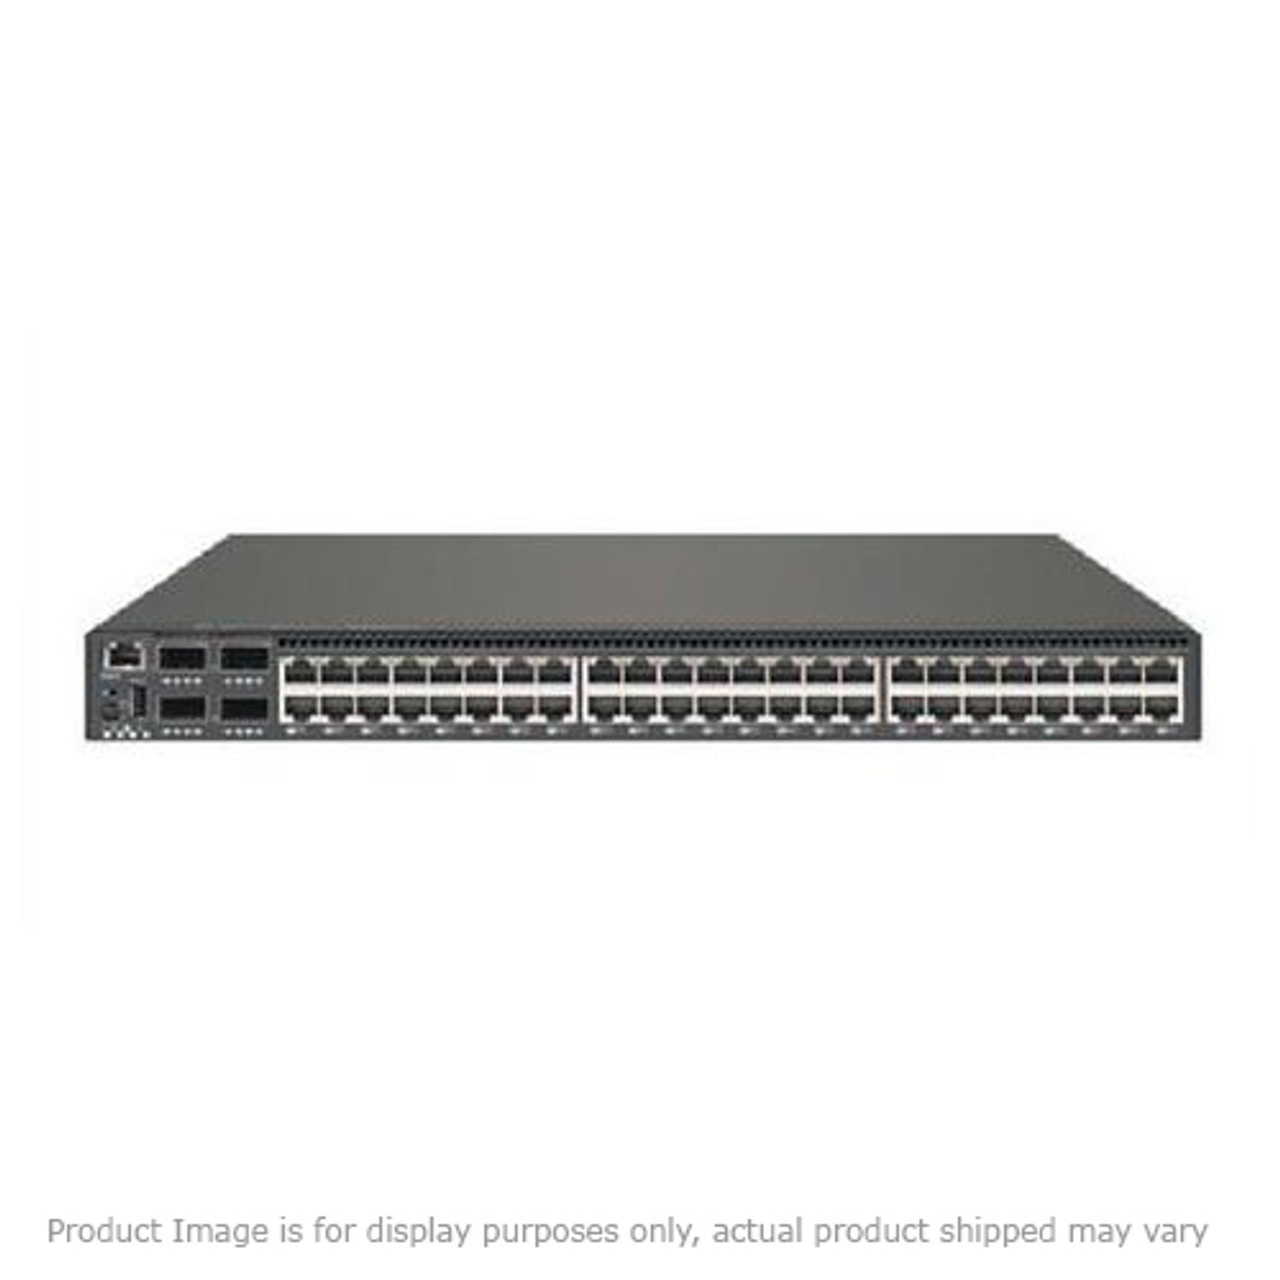 FS-500-CX4-24 Fortinet FortiSwitch FS-500-CX4-24 Switch Chassis 24 Ports Manageable 10/100/1000Base-T, 10GBase-CX4 (Refurbished)